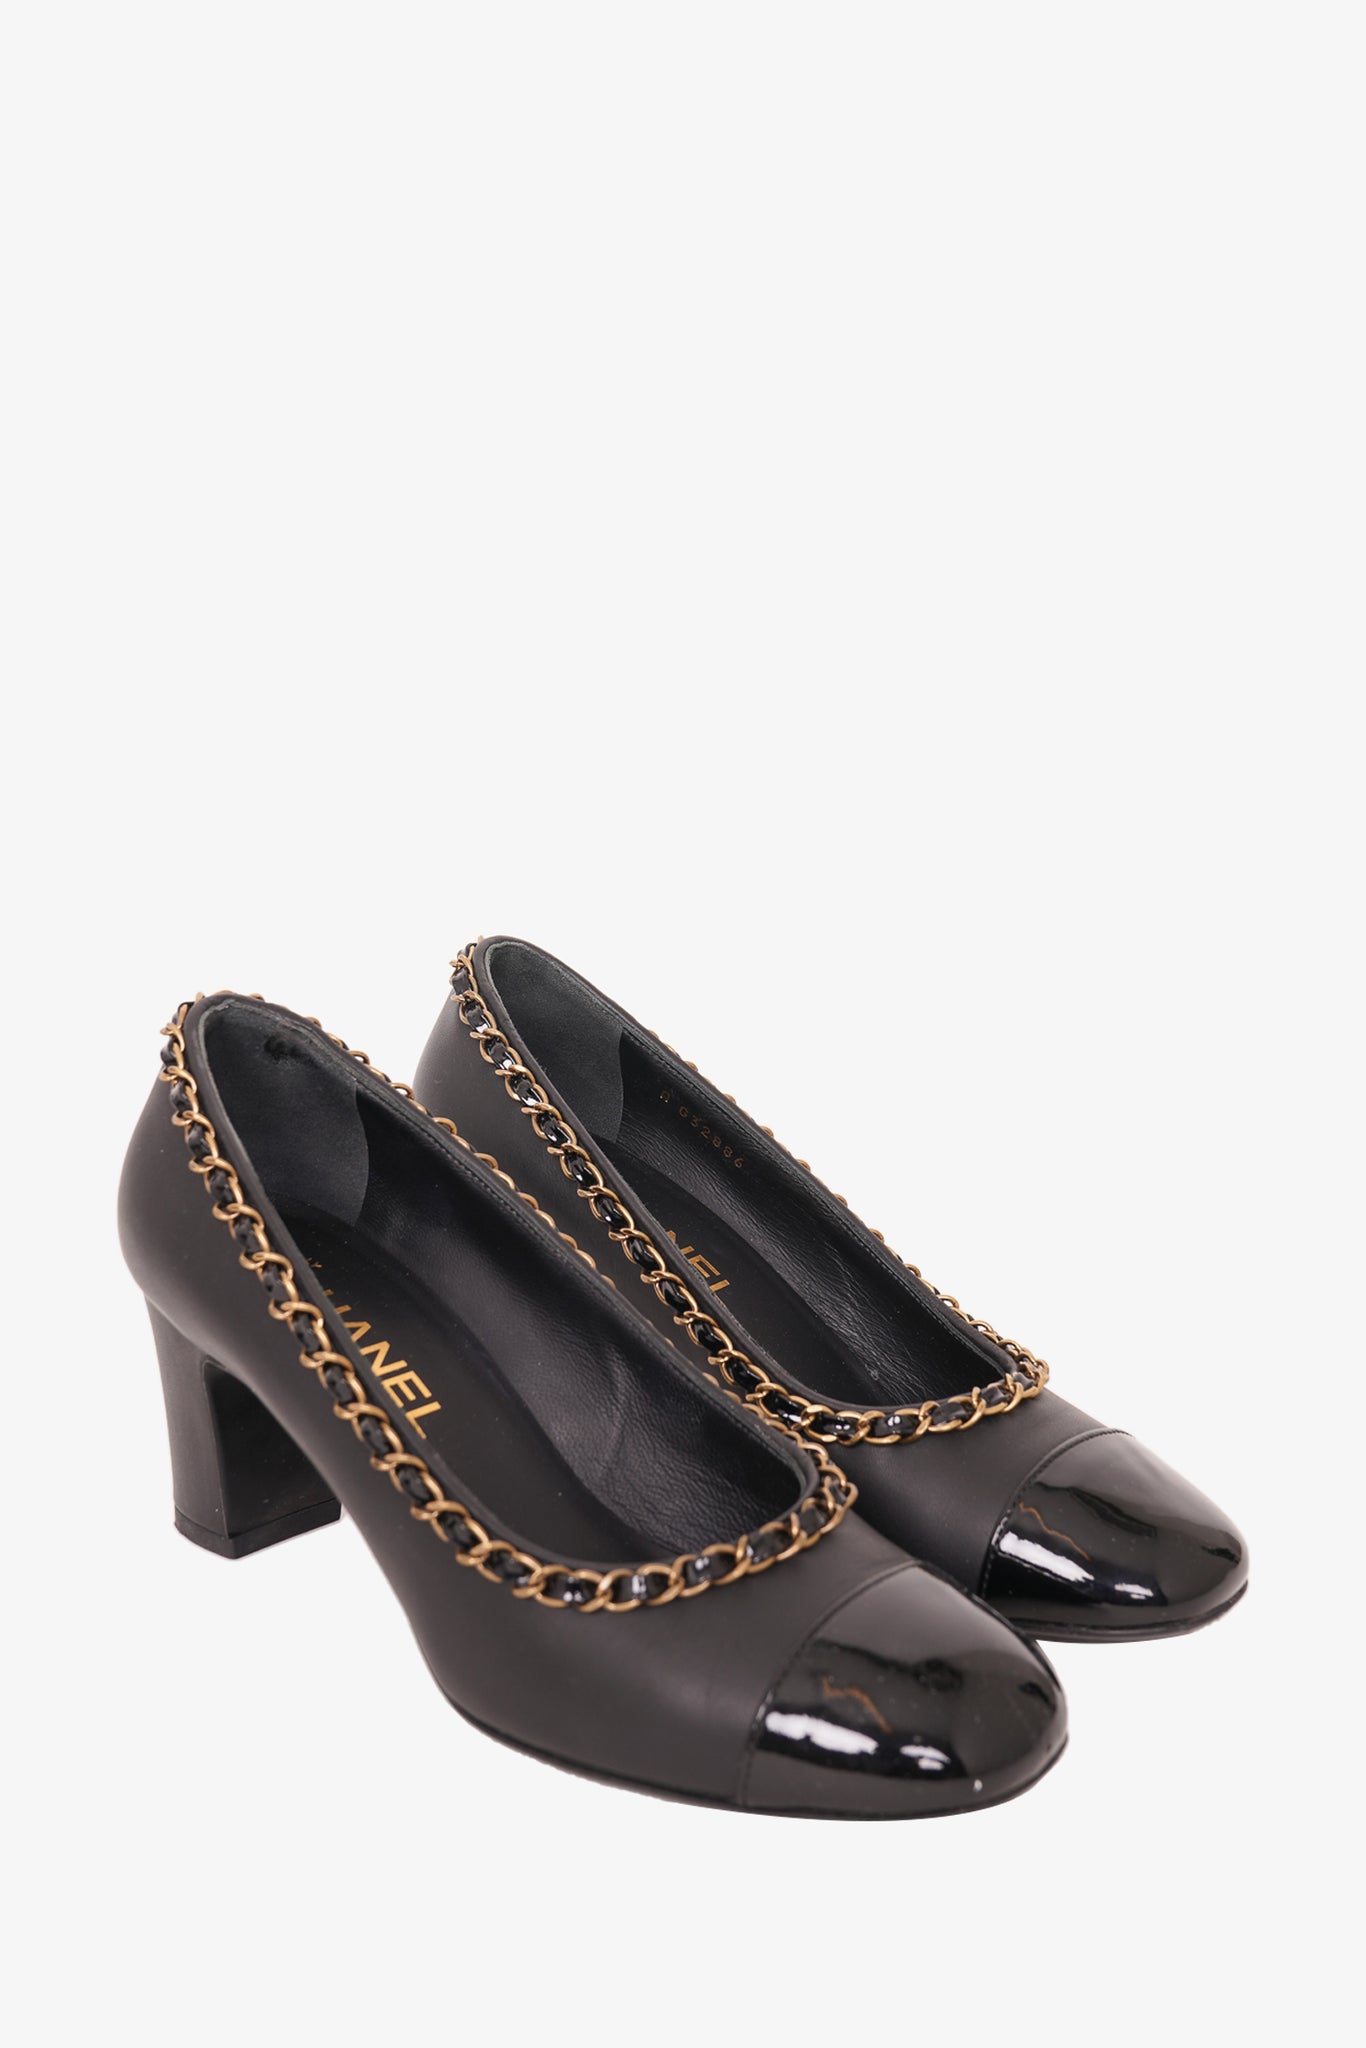 Chanel Black Leather Chain Rounded Heels Size 36.5